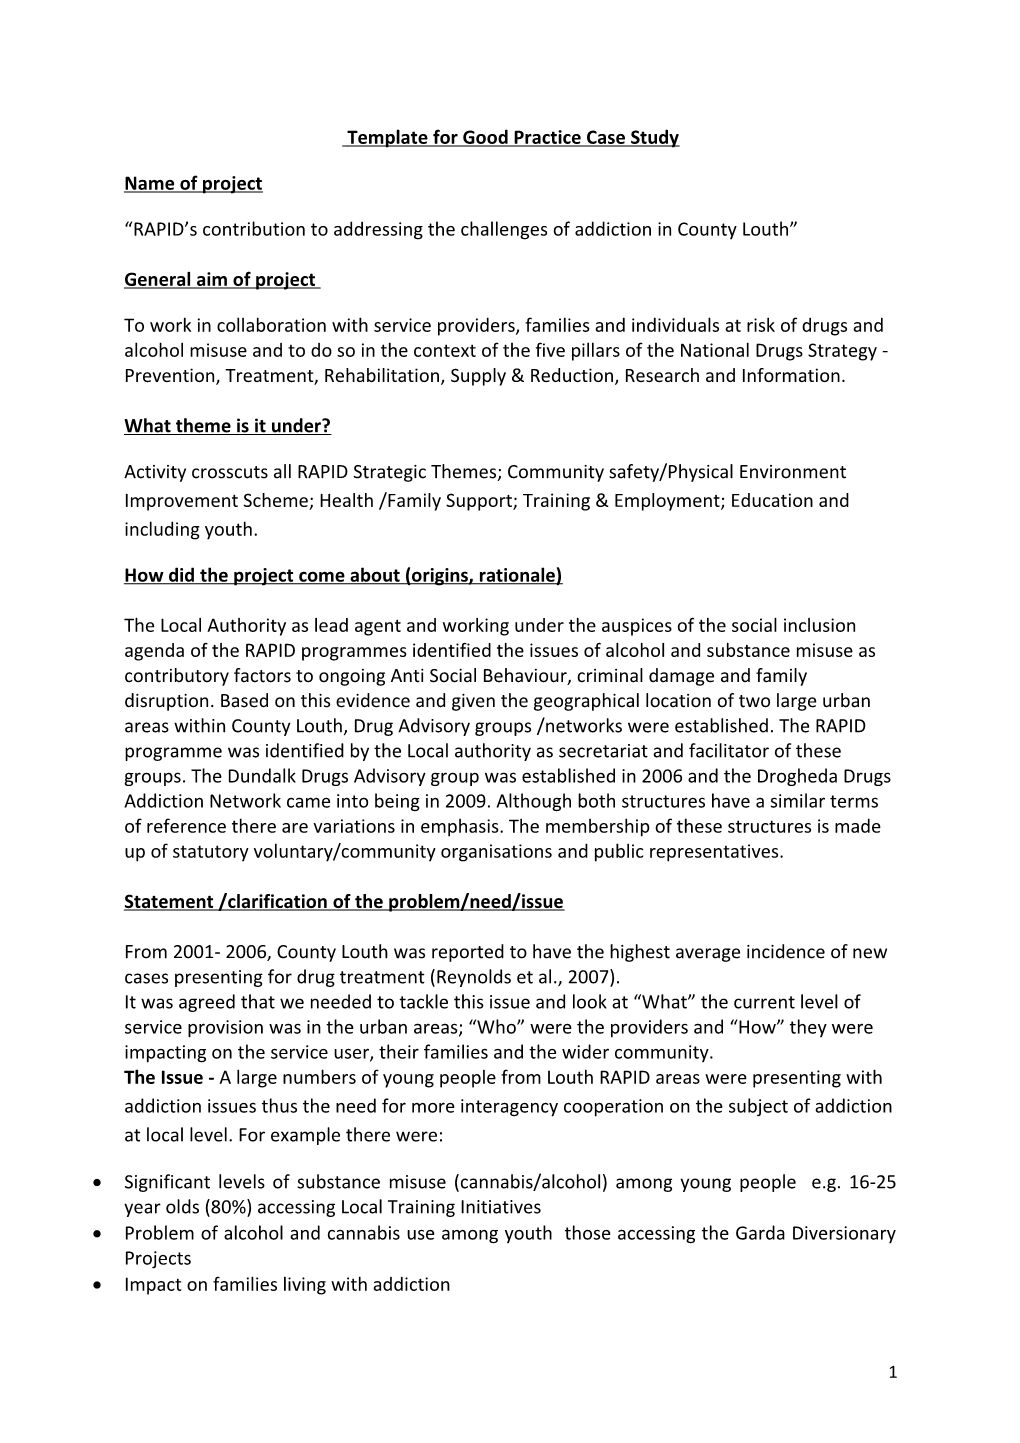 DRAFT Template for Good Practice Case Study